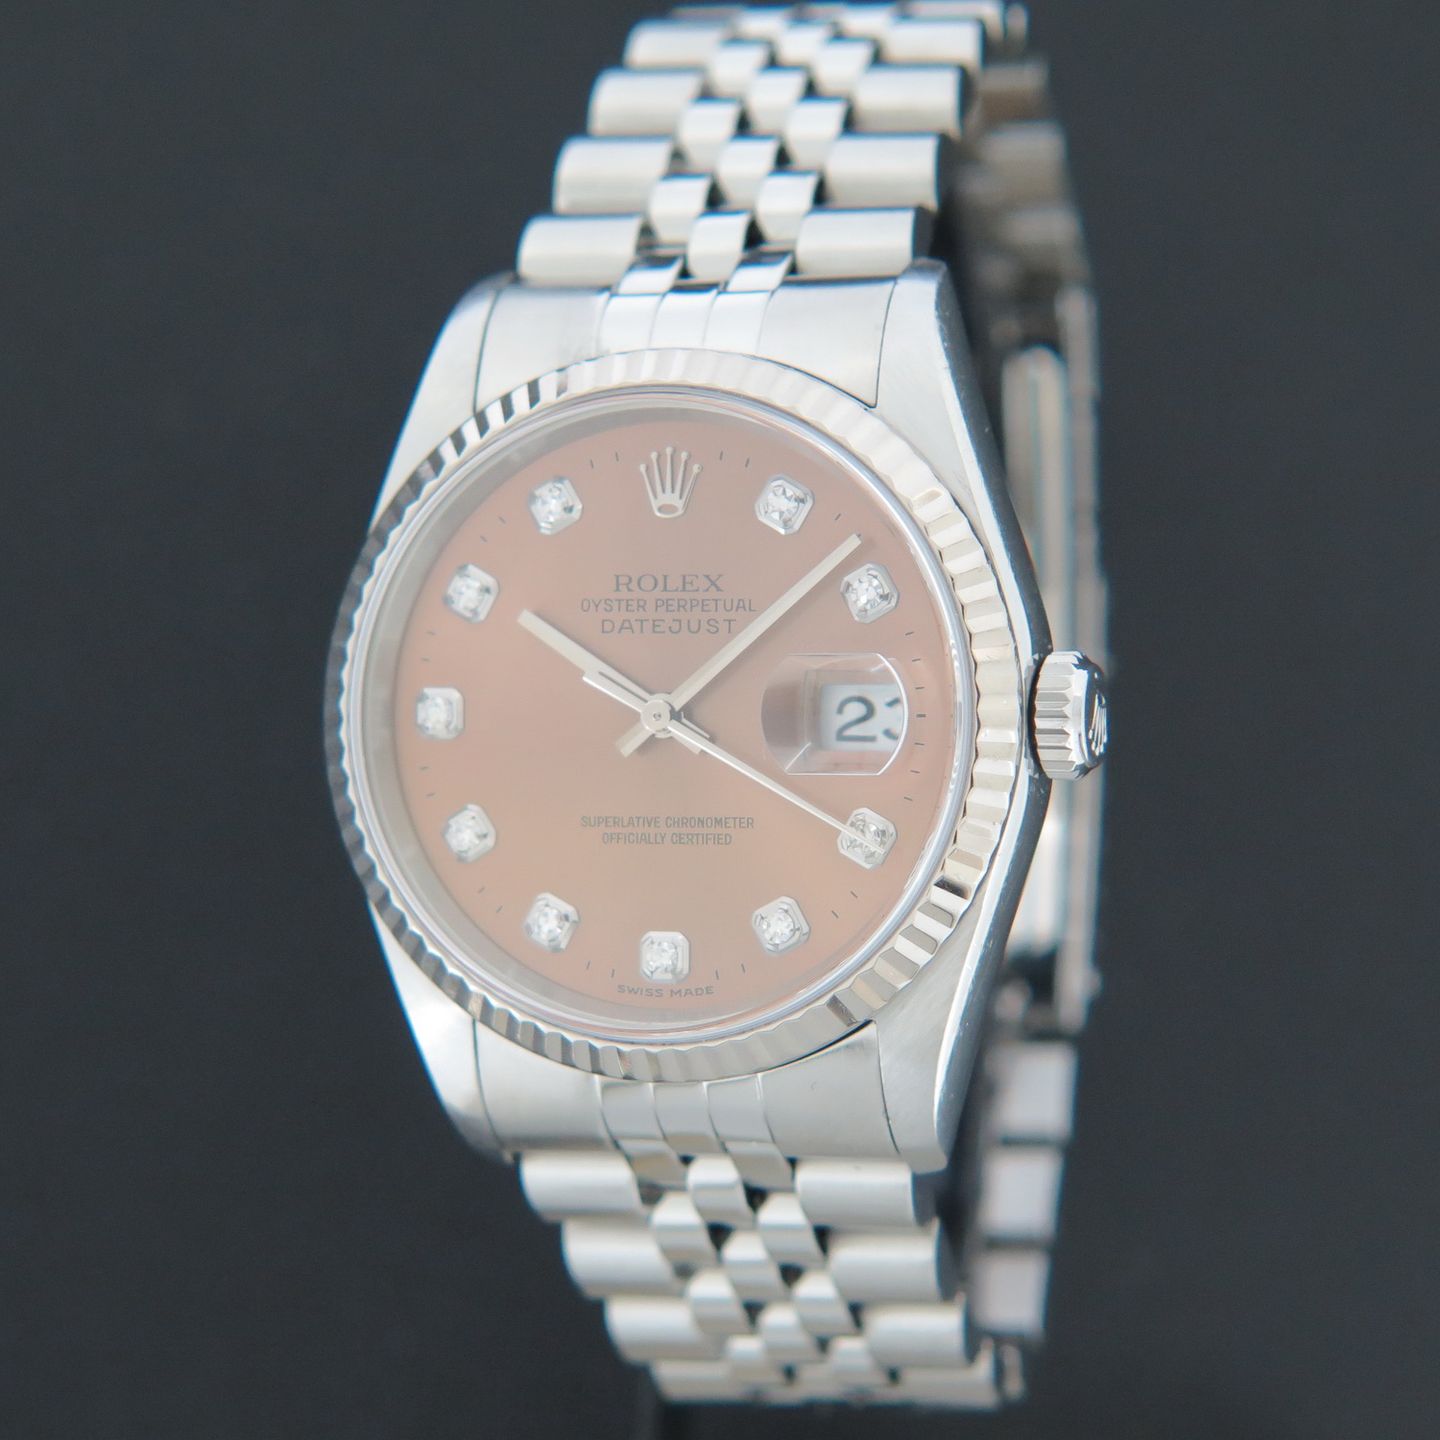 Rolex Datejust 36 116234 (1999) - 36mm Staal (1/4)